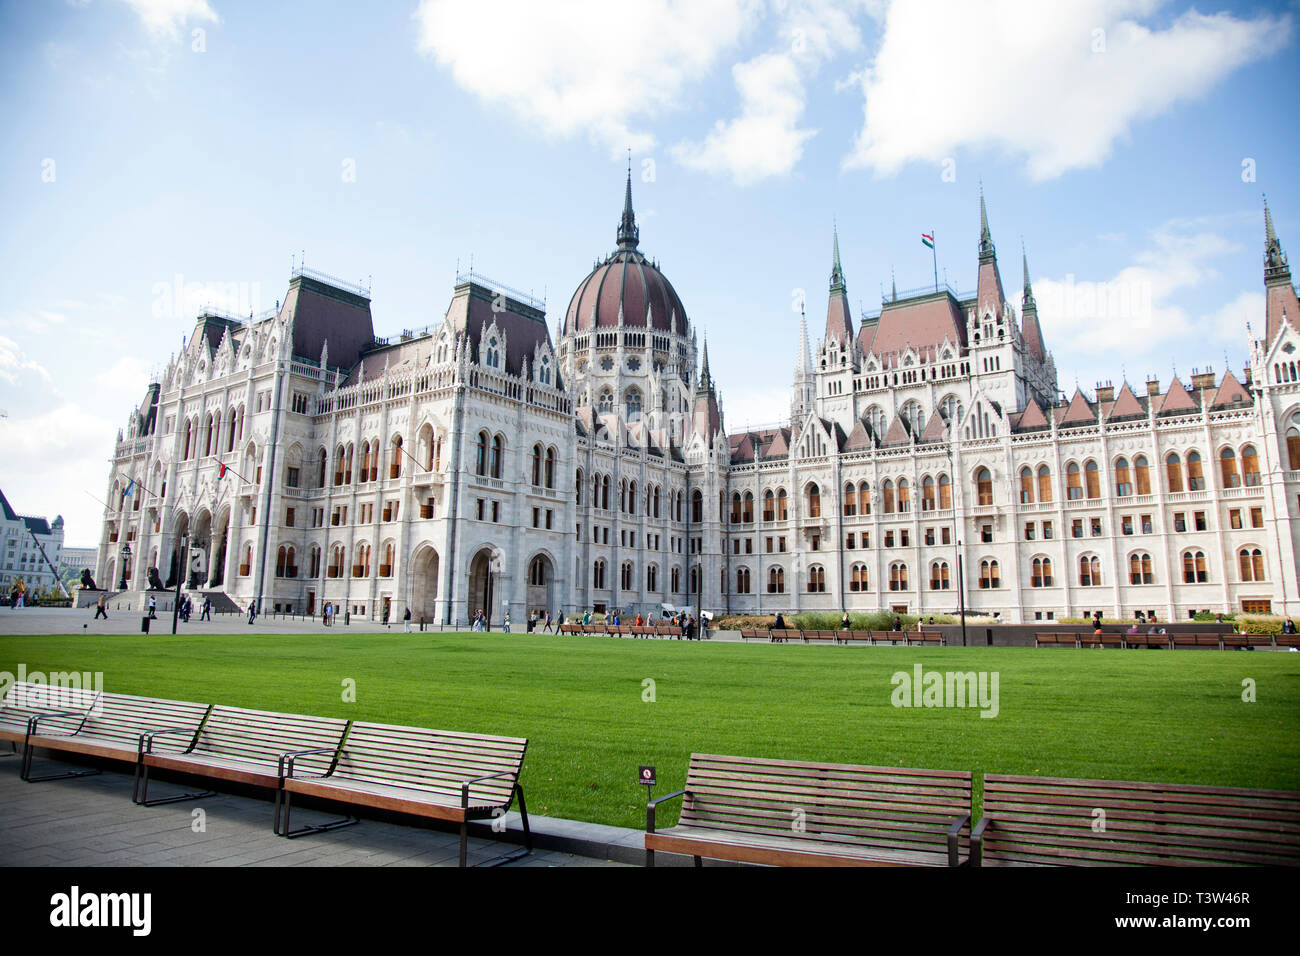 BUDAPEST, HUNGARY - SEPTEMBER 22, 2017: The Hungarian Parliament building is a landmark in Budapest, Hungary. Stock Photo